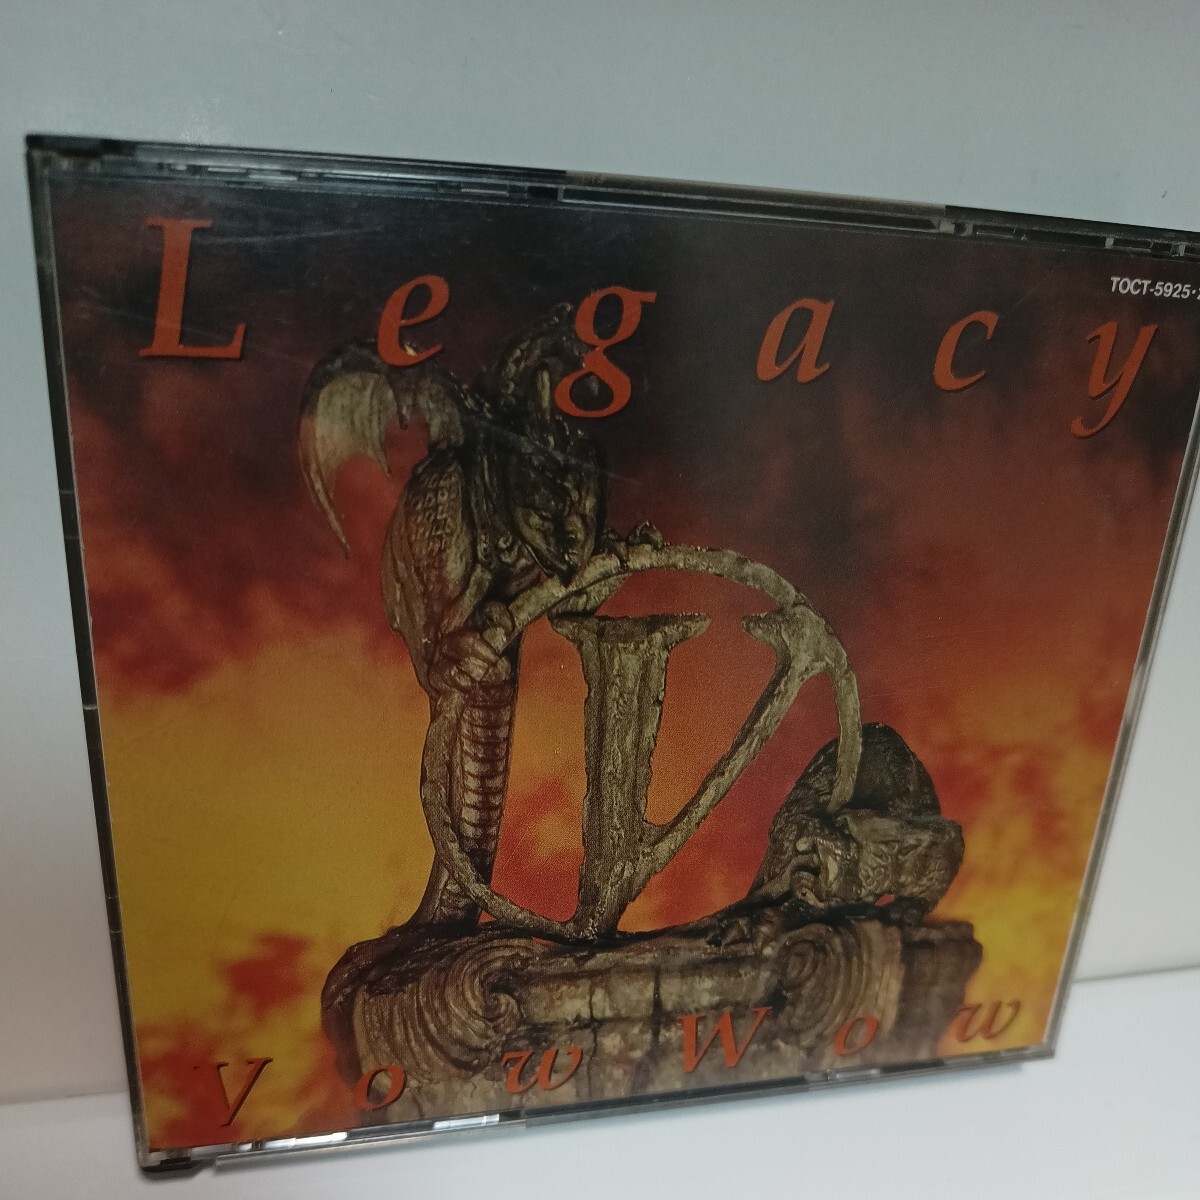 VOW WOW「LEGACY」2CD_画像1